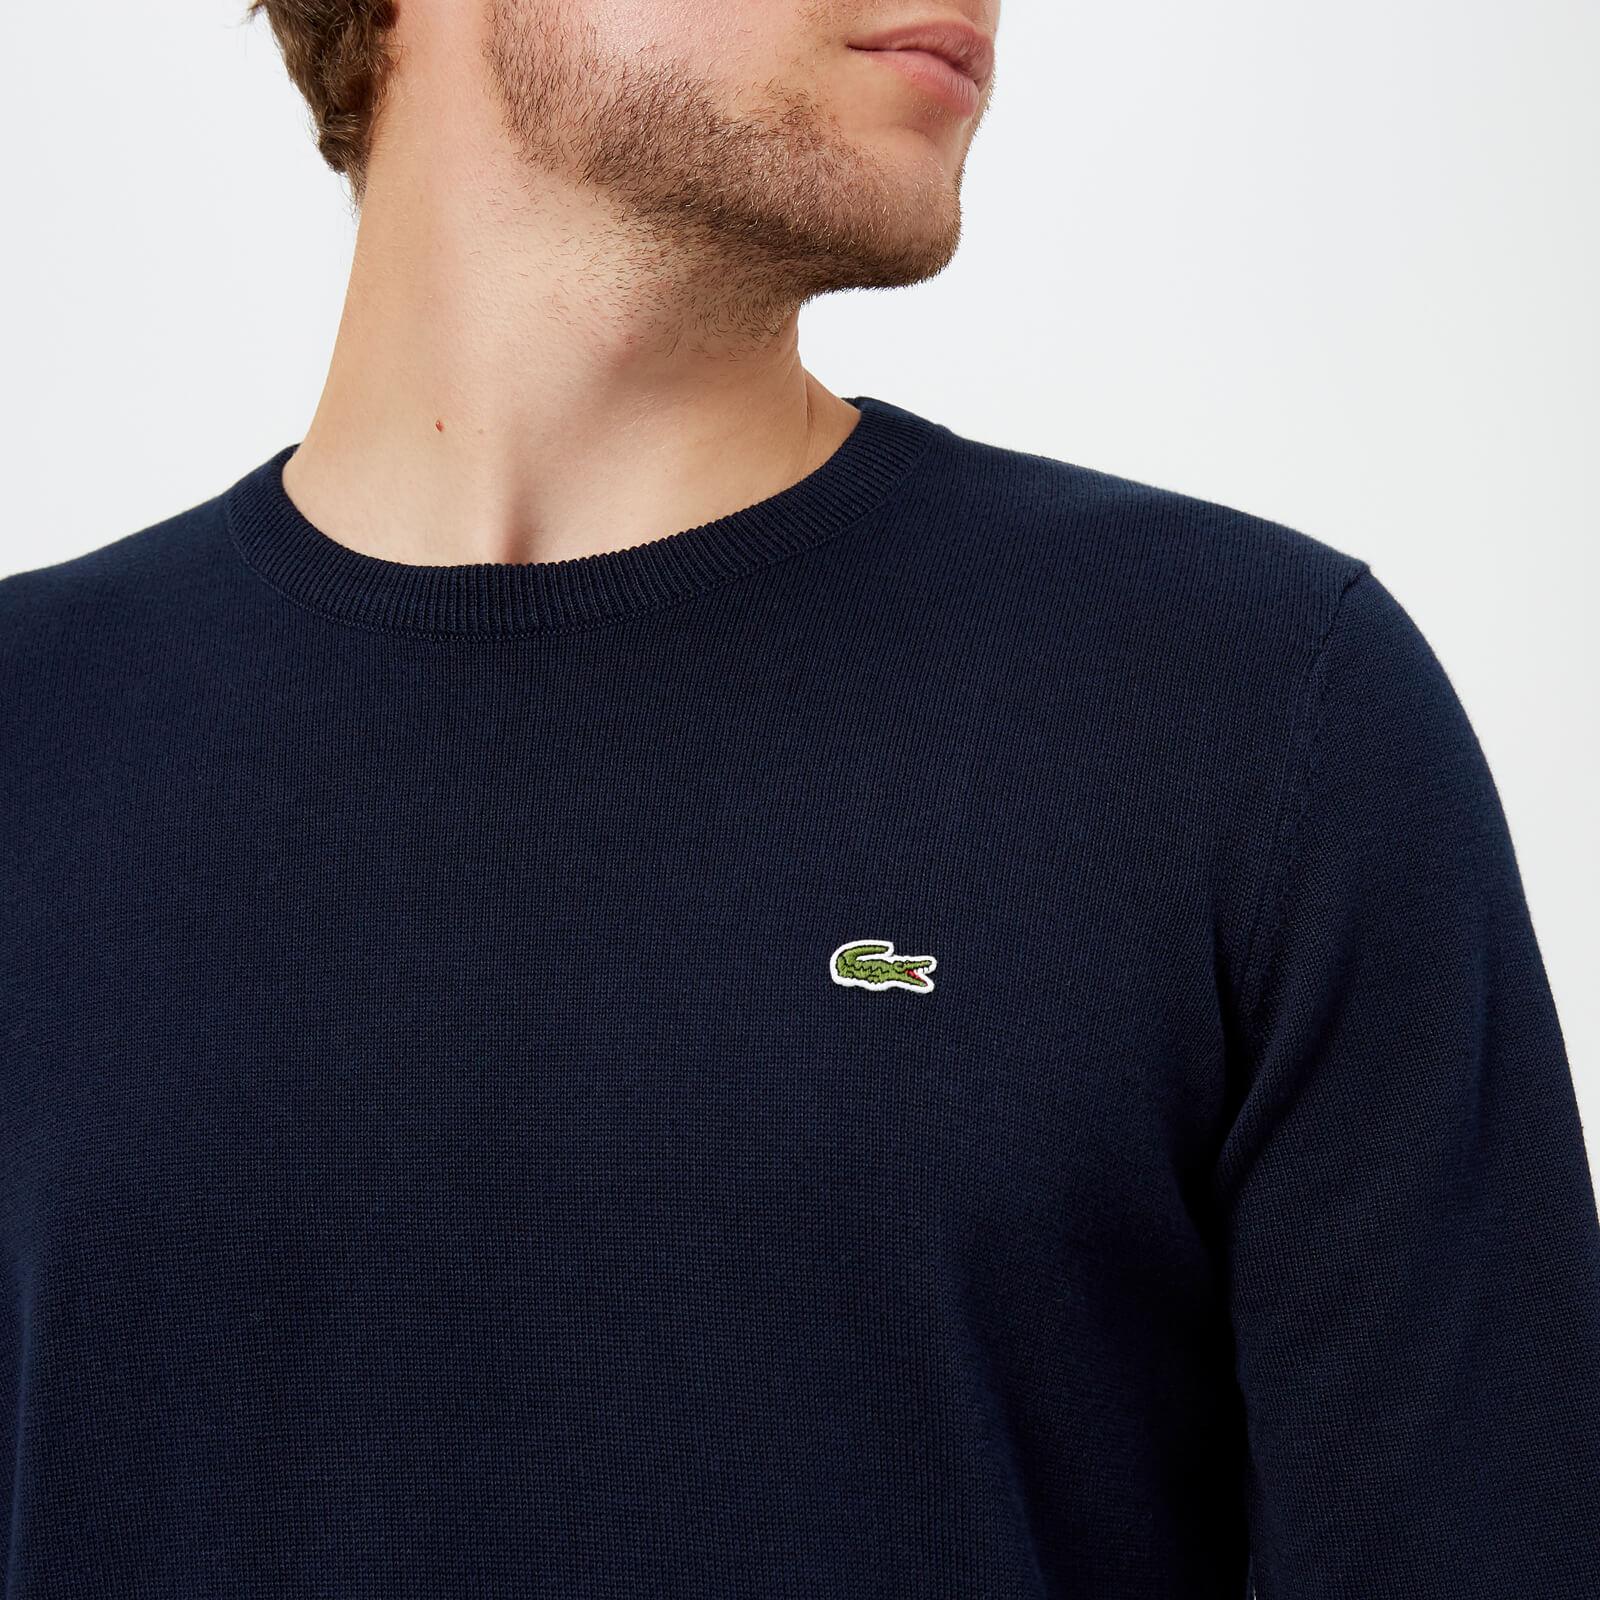 Lacoste Classic Cotton Crew Knit Jumper in Navy (Blue) for Men - Save ...